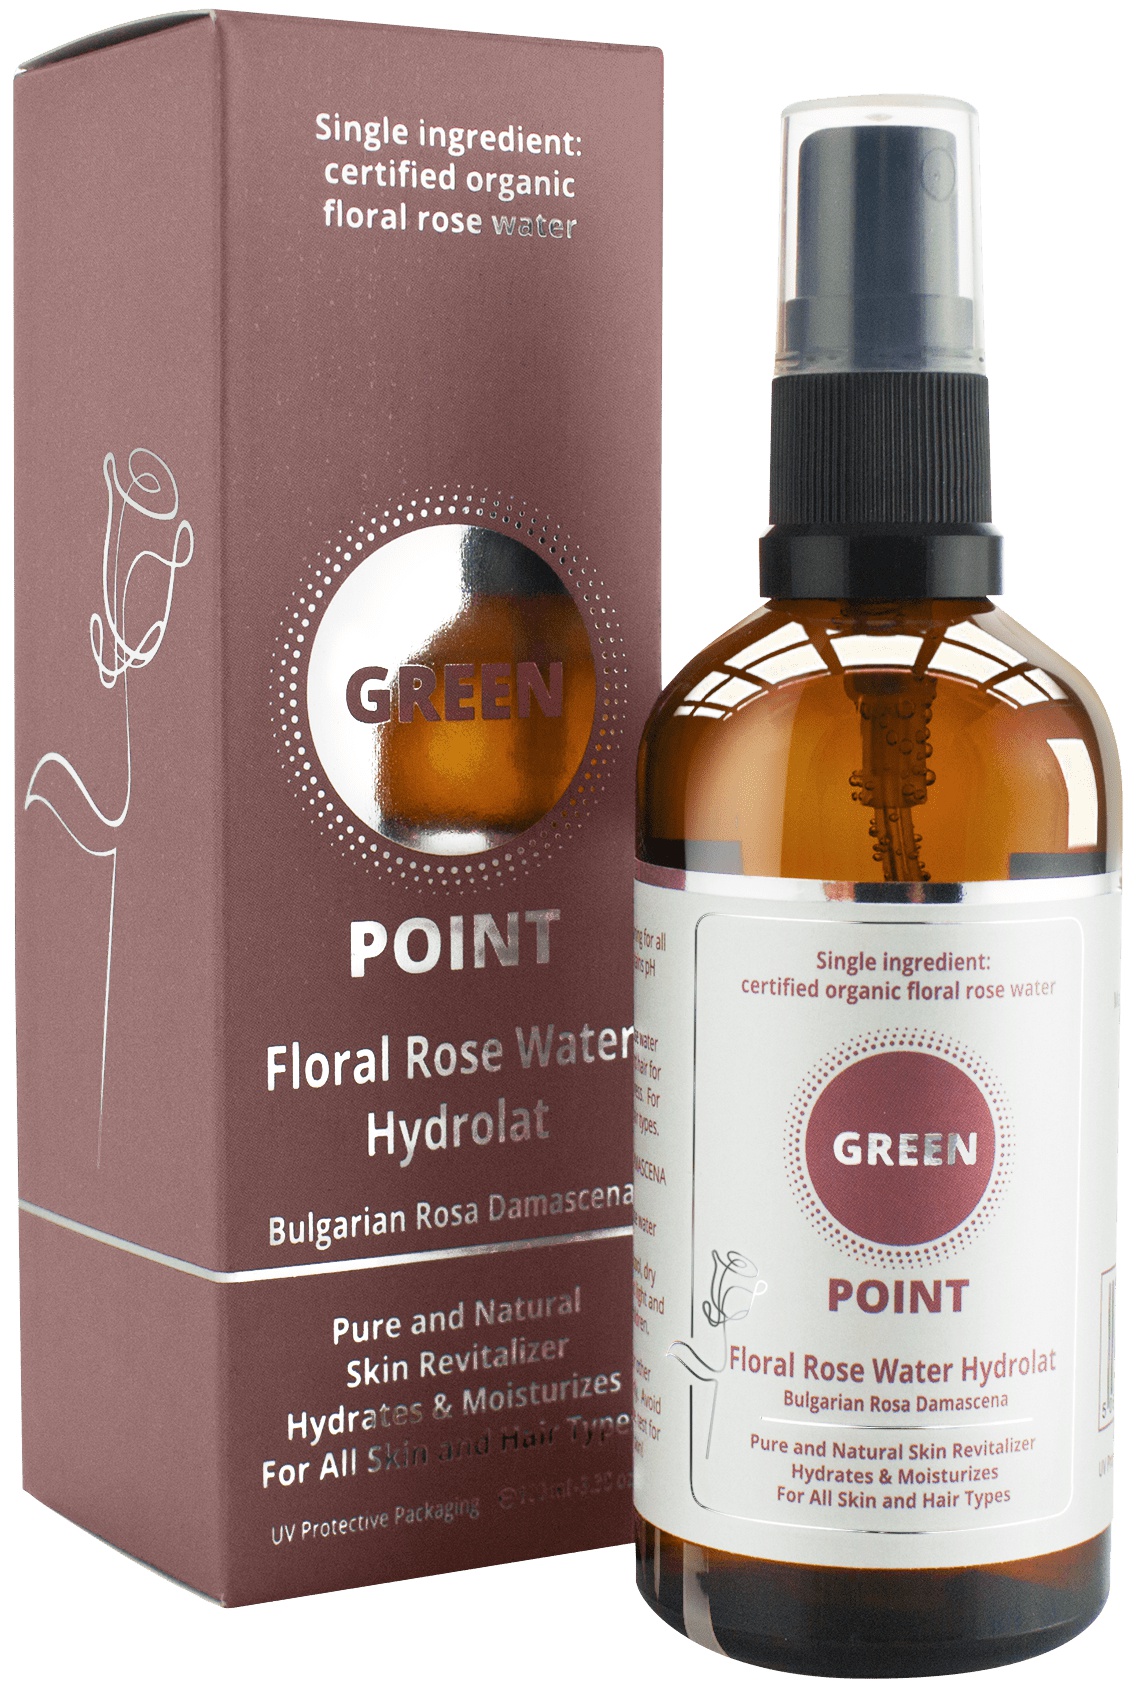 GREEN Floral Rose Water Hydrolat